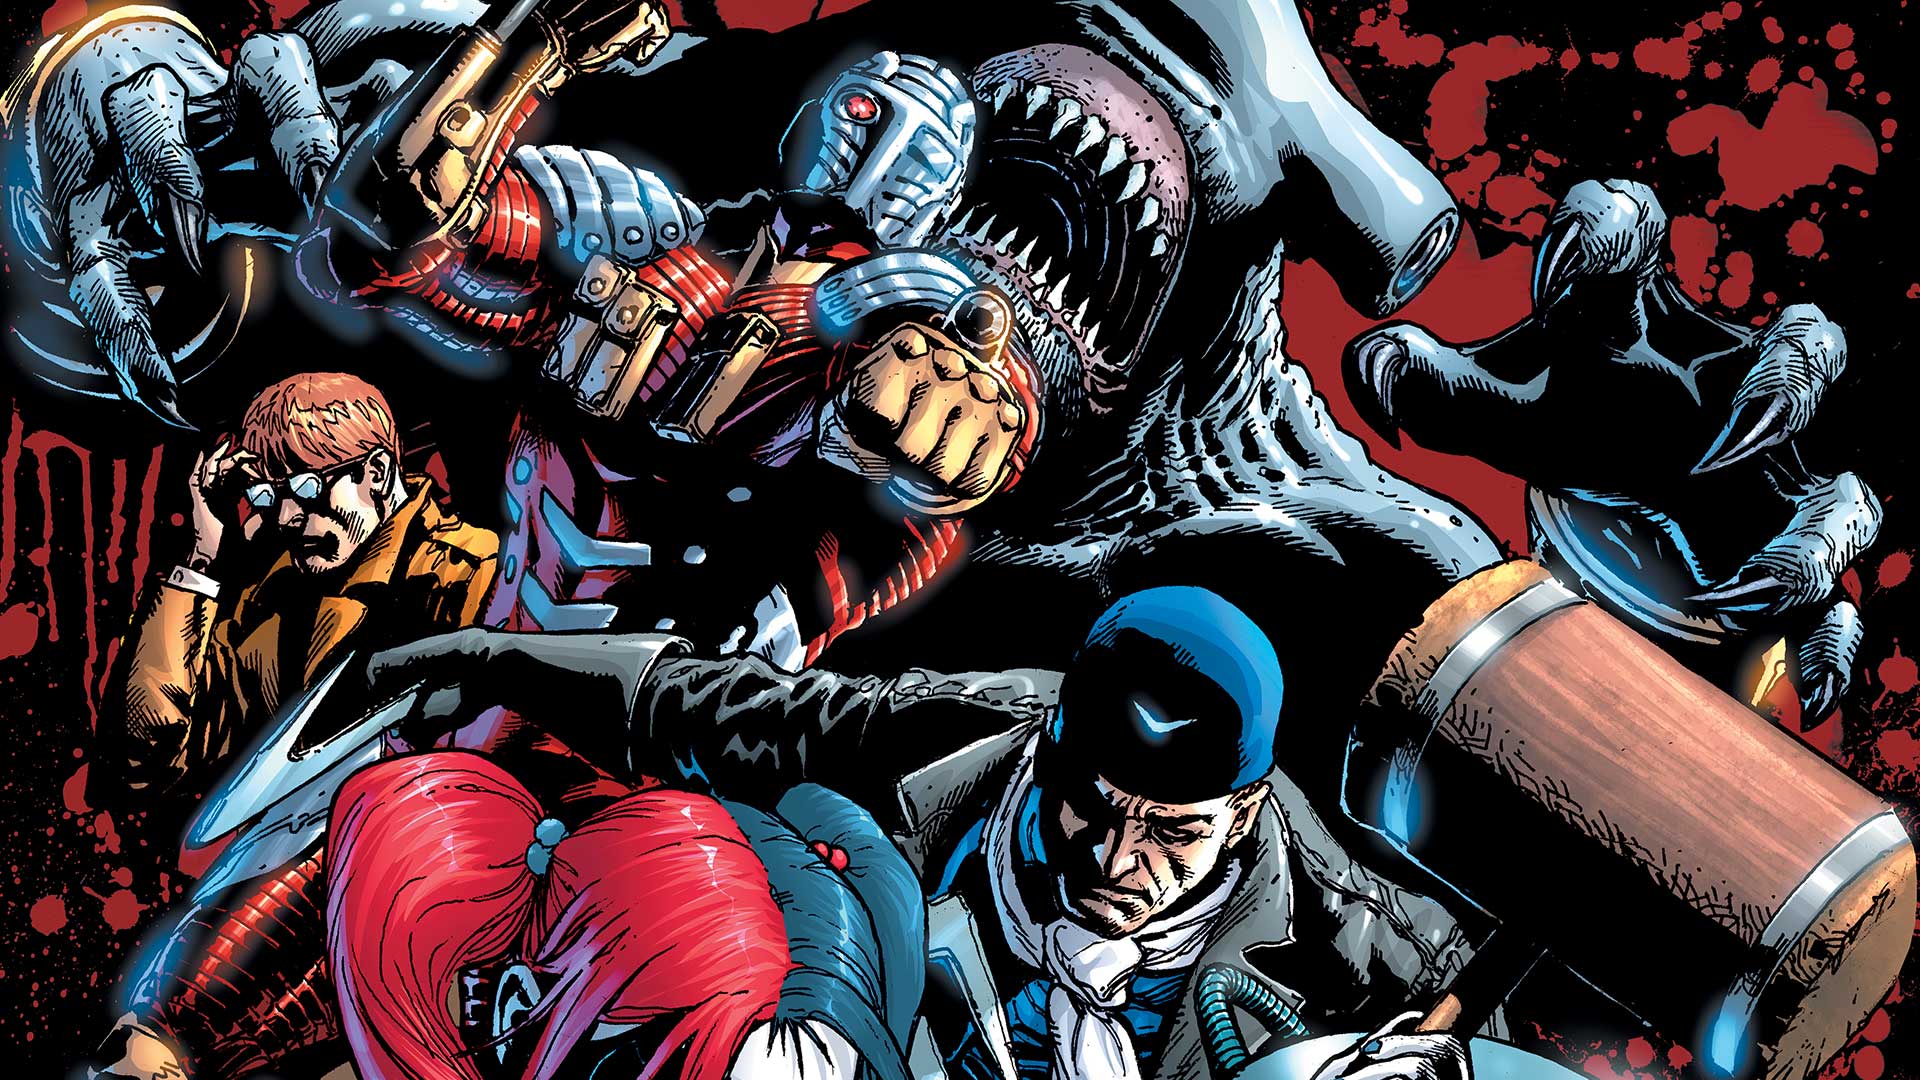 Suicide Squad Video Game In Development. Cosmic Book News